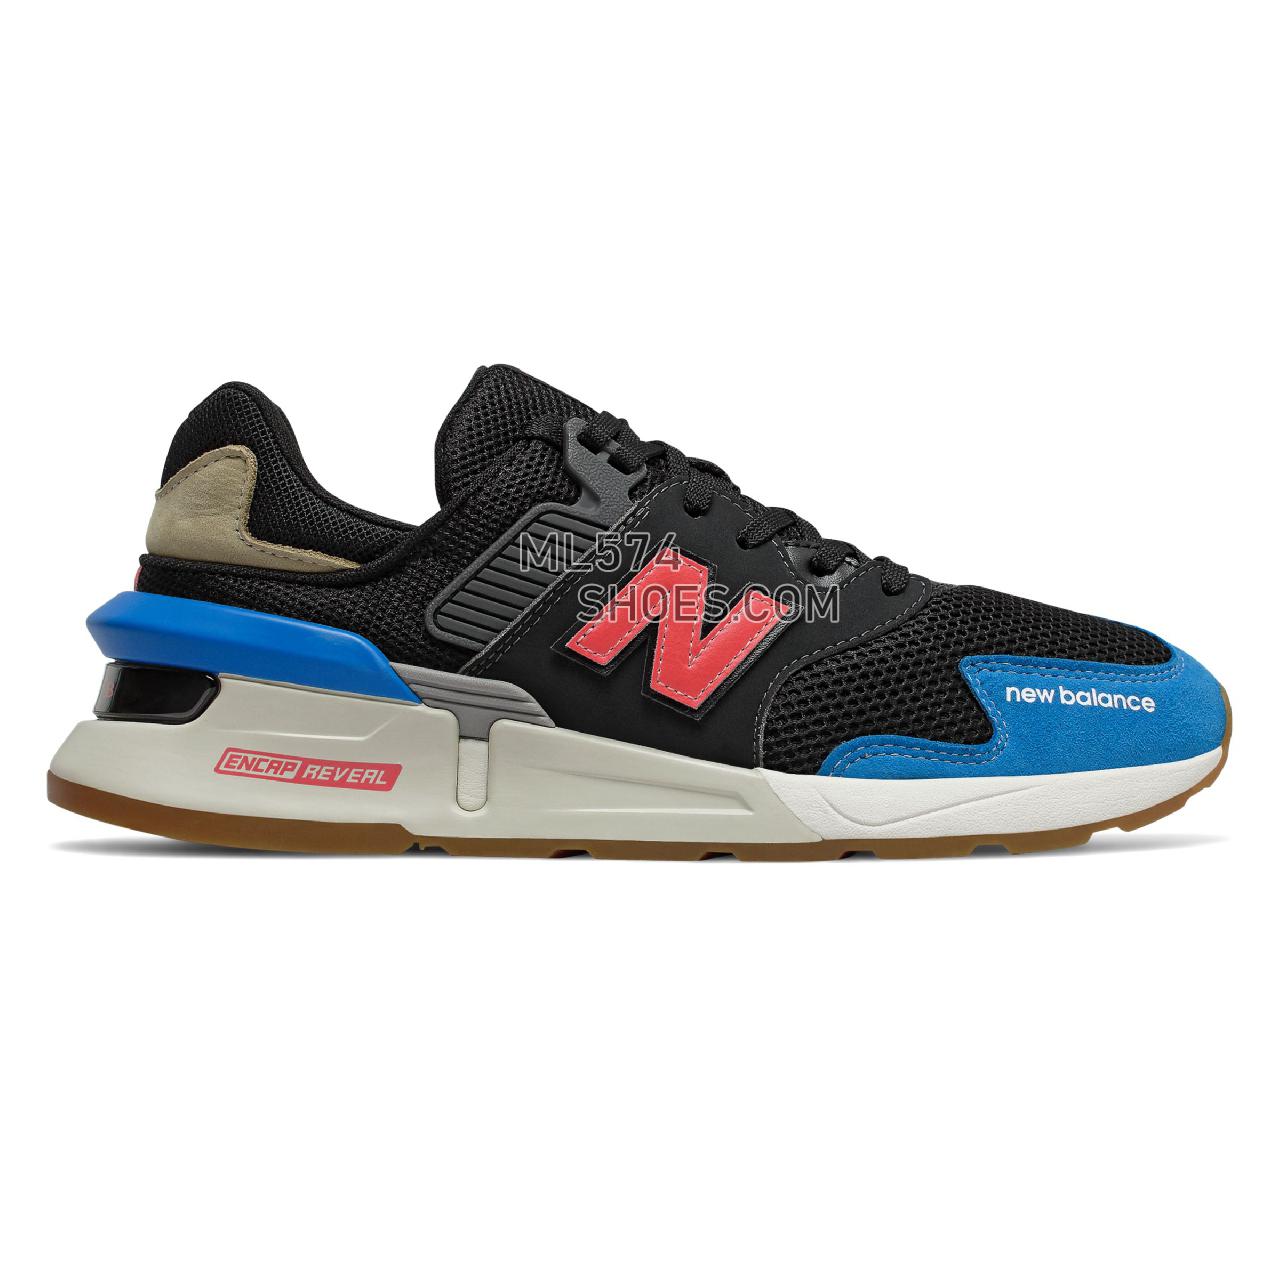 New Balance 997 Sport - Men's Sport Style Sneakers - Black with Neo Classic Blue - MS997JHZ